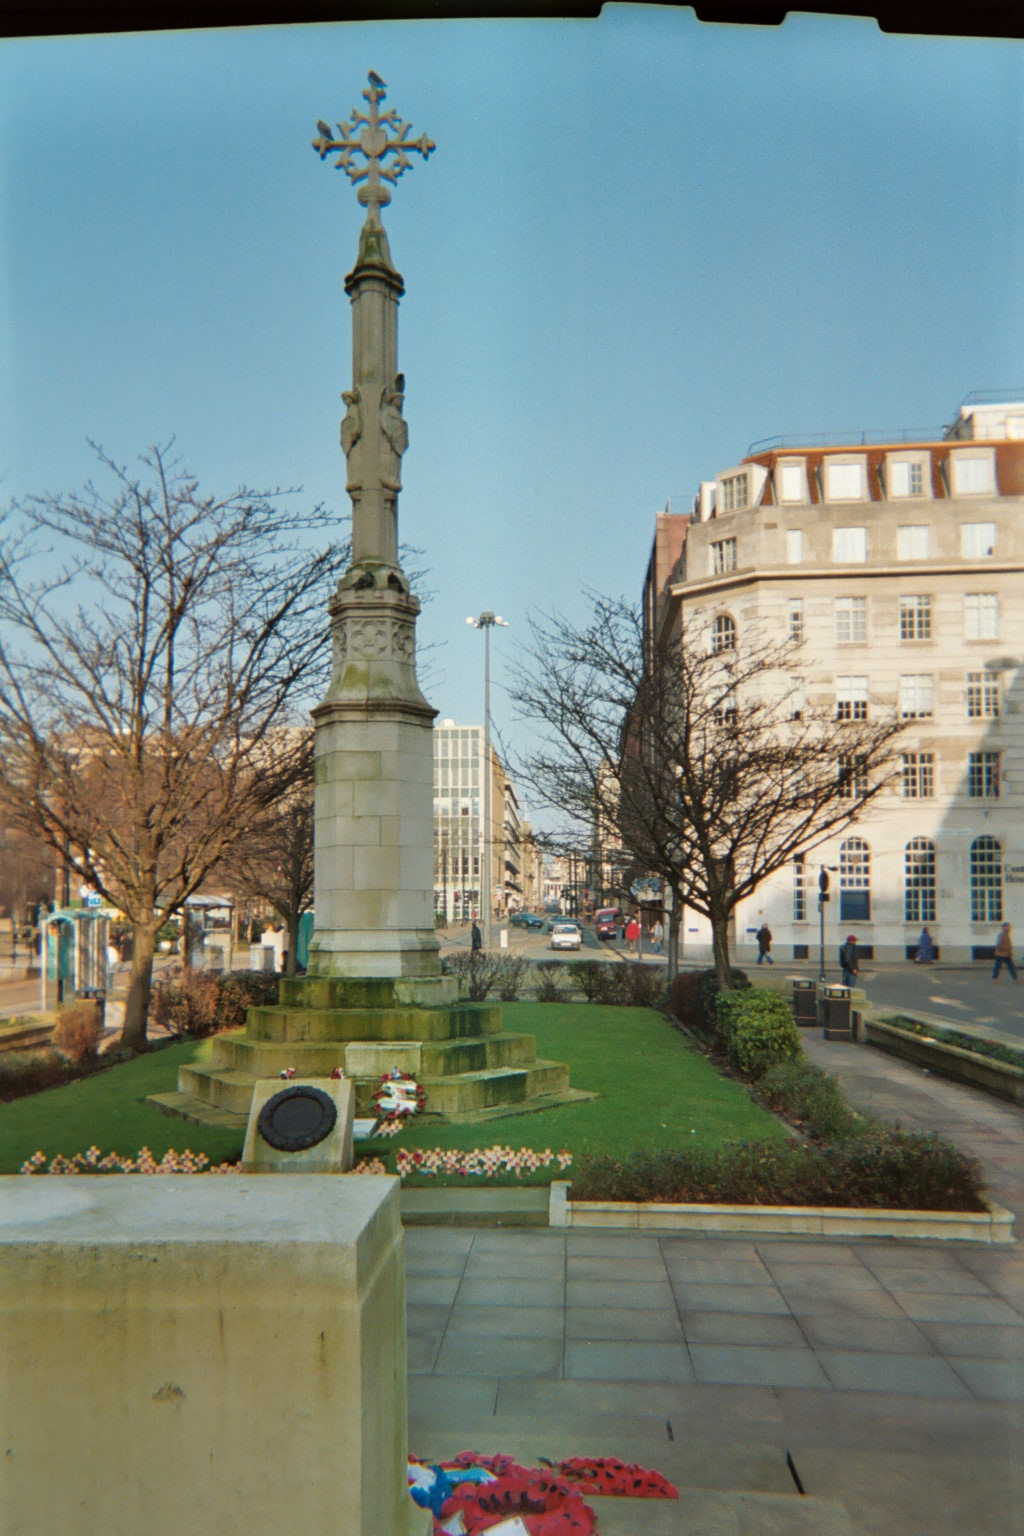 War memorial, St Peters Square, Manchester